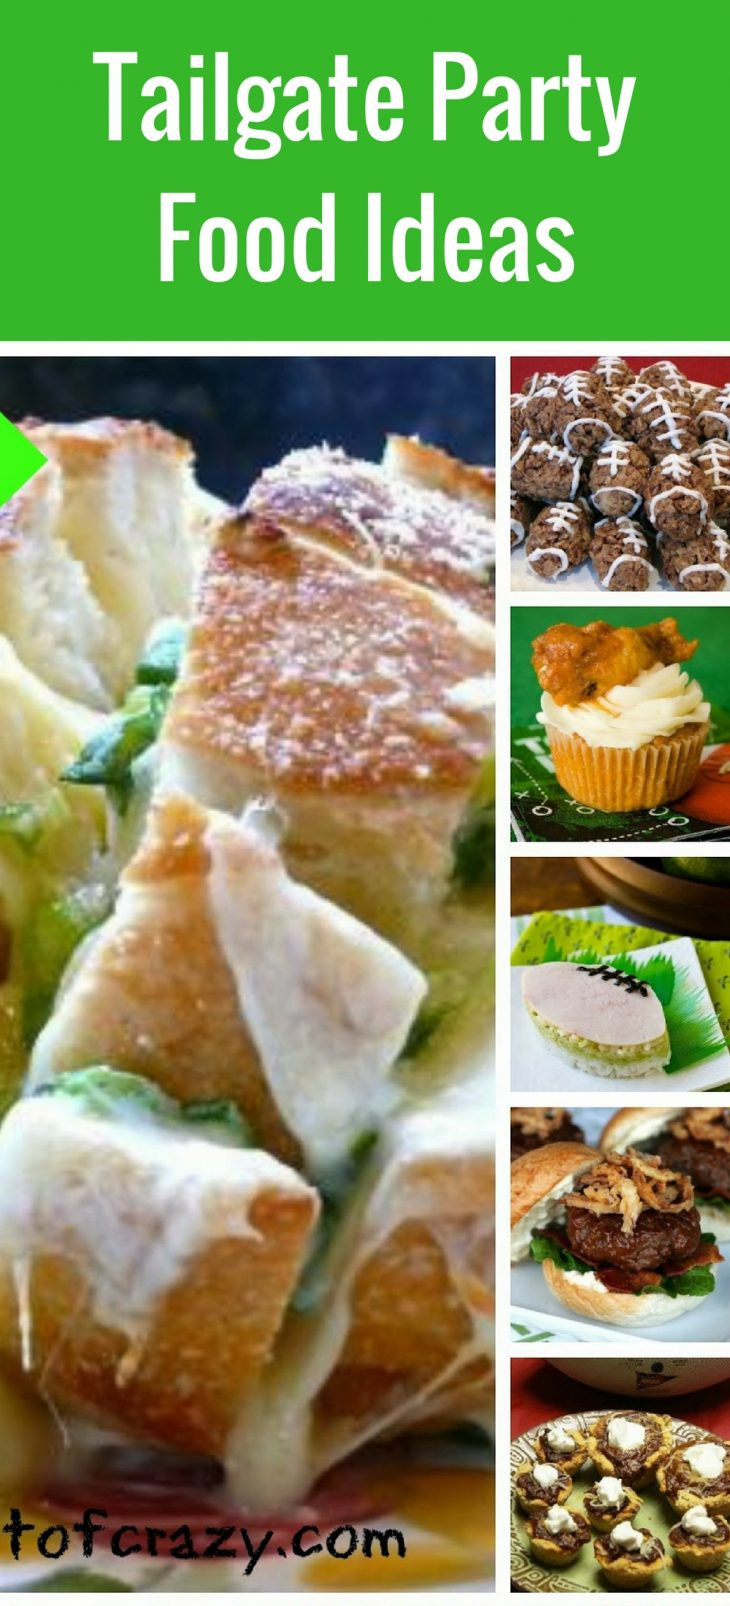 Tailgate Party Food Ideas
 Super Bowl Food Ideas Just Short of Crazy